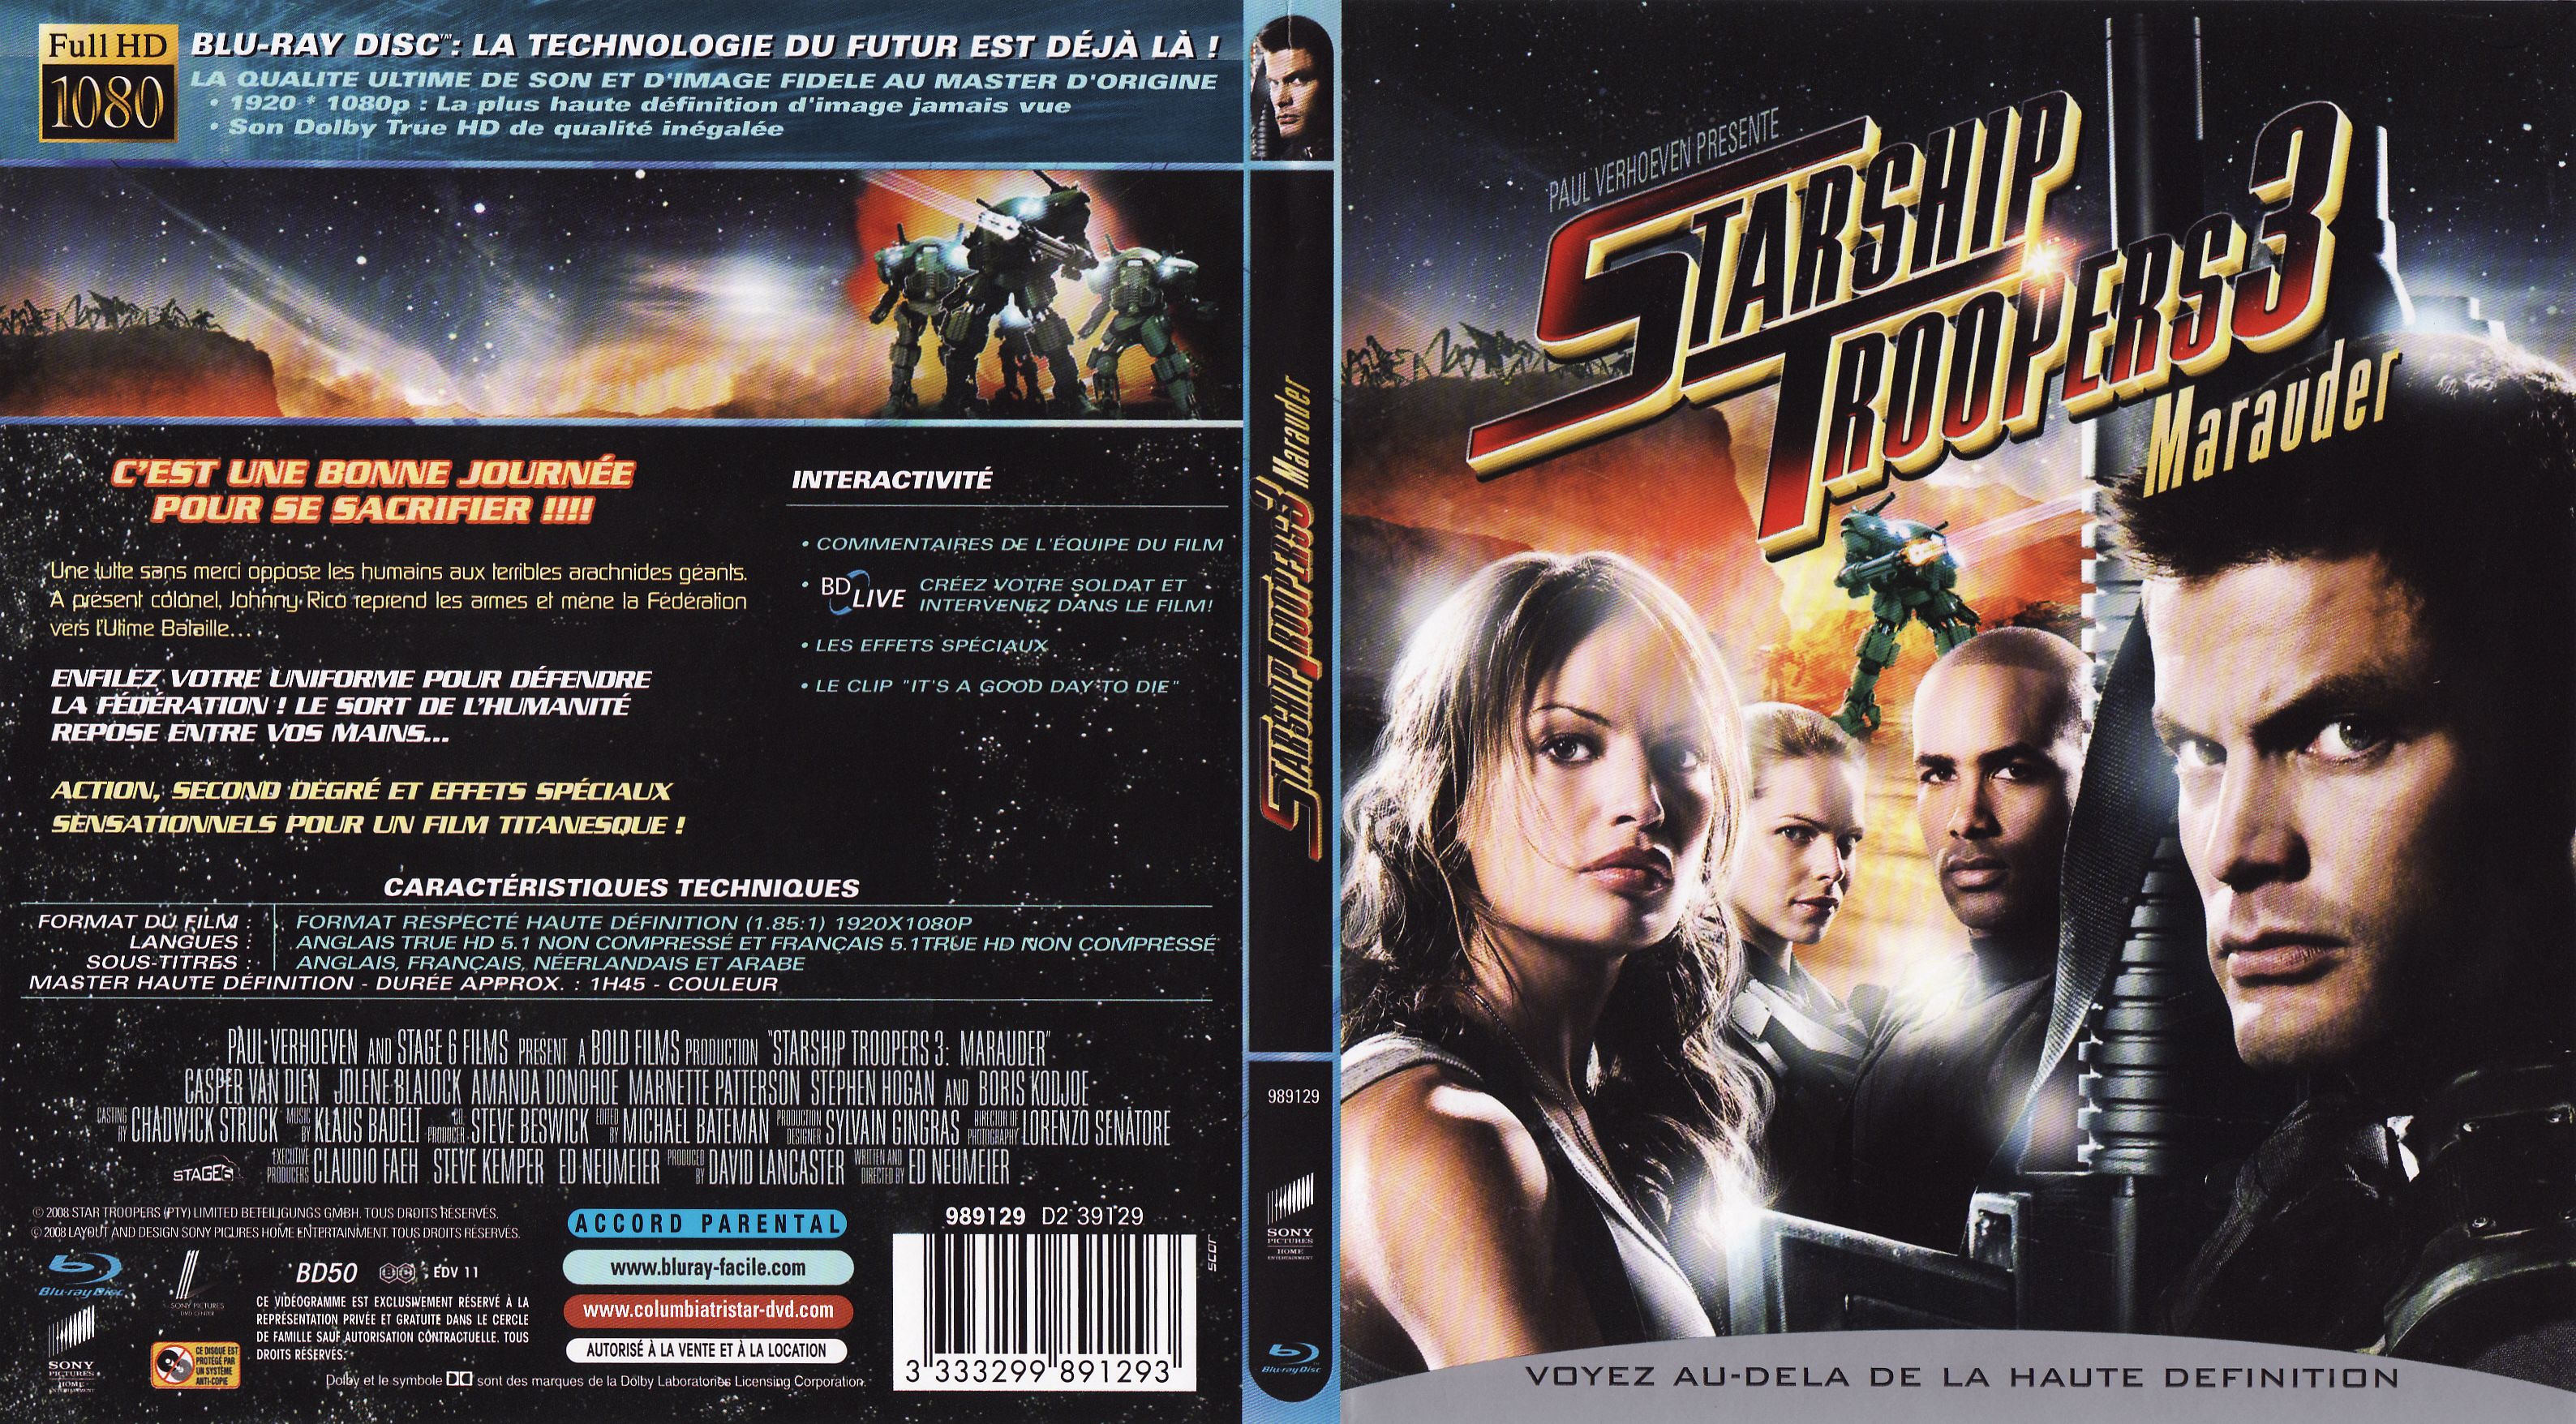 Jaquette DVD Starship troopers 3 (BLU-RAY)